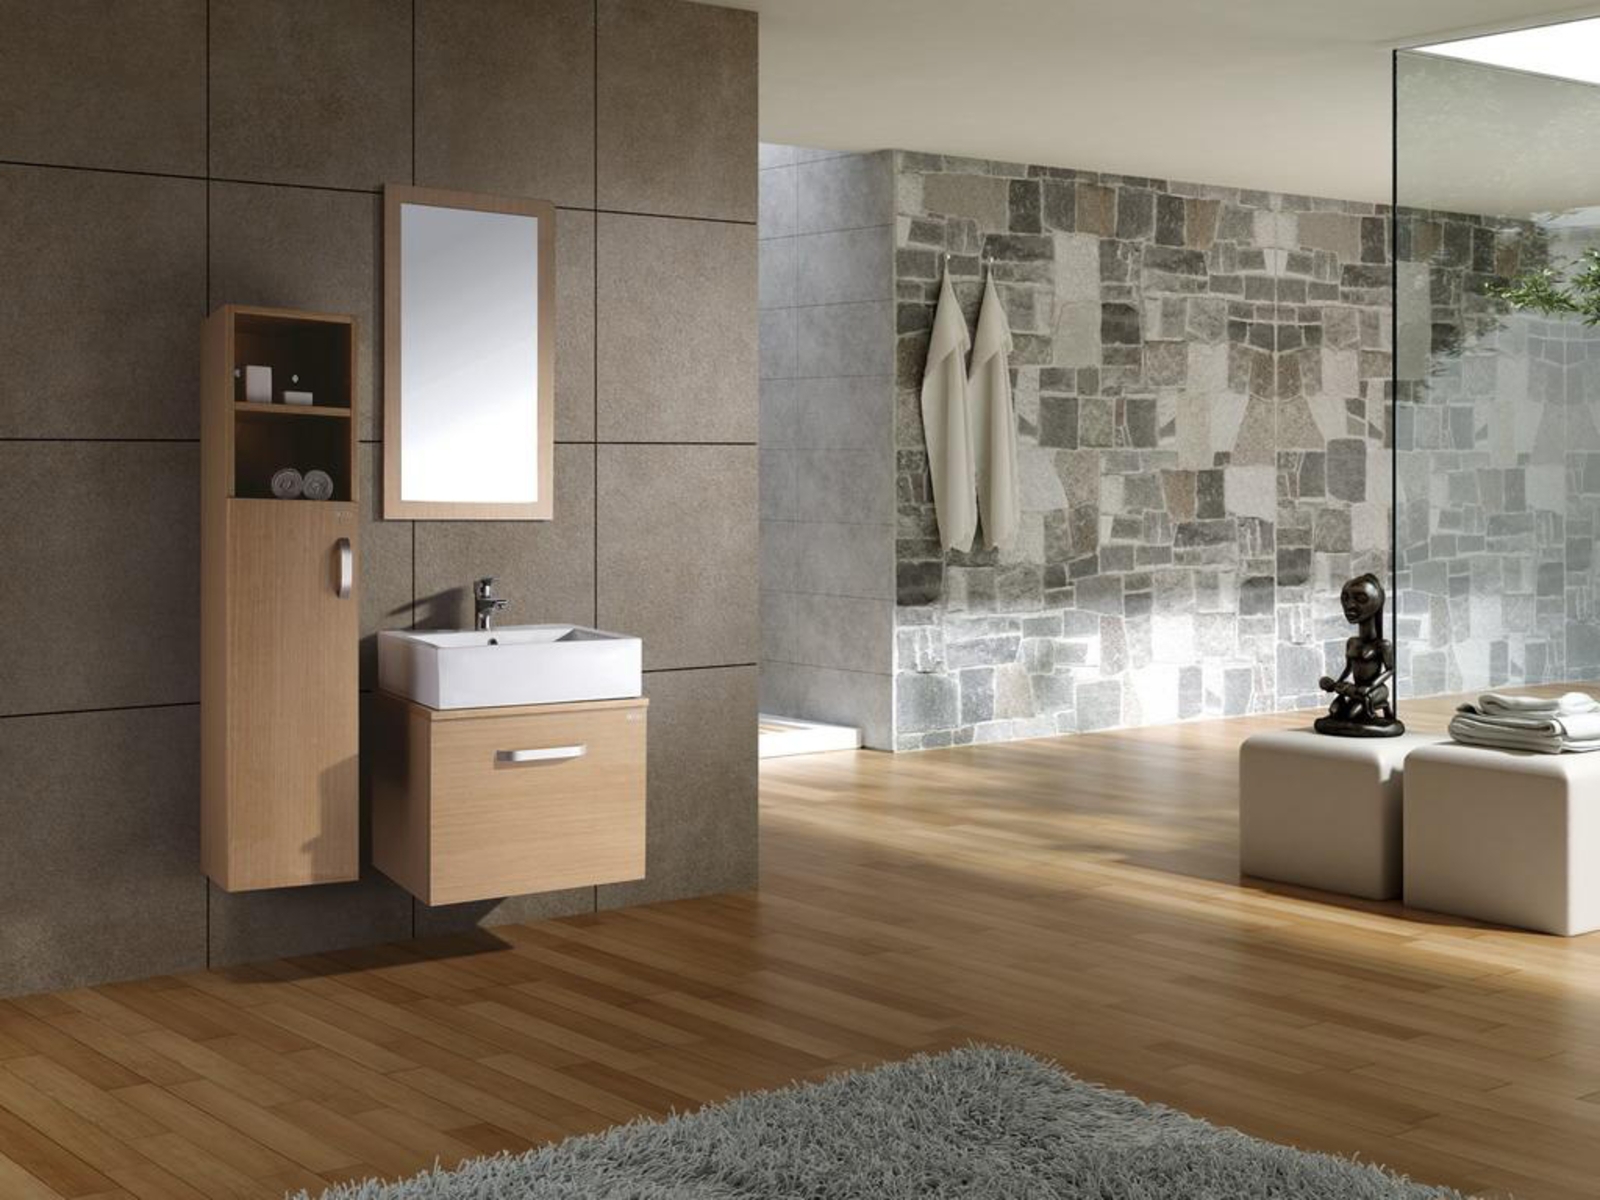 Wooden Flooring In Enchanting Wooden Flooring Design Ideas In Contemporary Bathroom Furnished With Vanity Sink Coupled By Mirror And Added With Bathroom Wall Cabinets On Side Bathroom The Best Choice For Bathroom: Bathroom Wall Cabinets